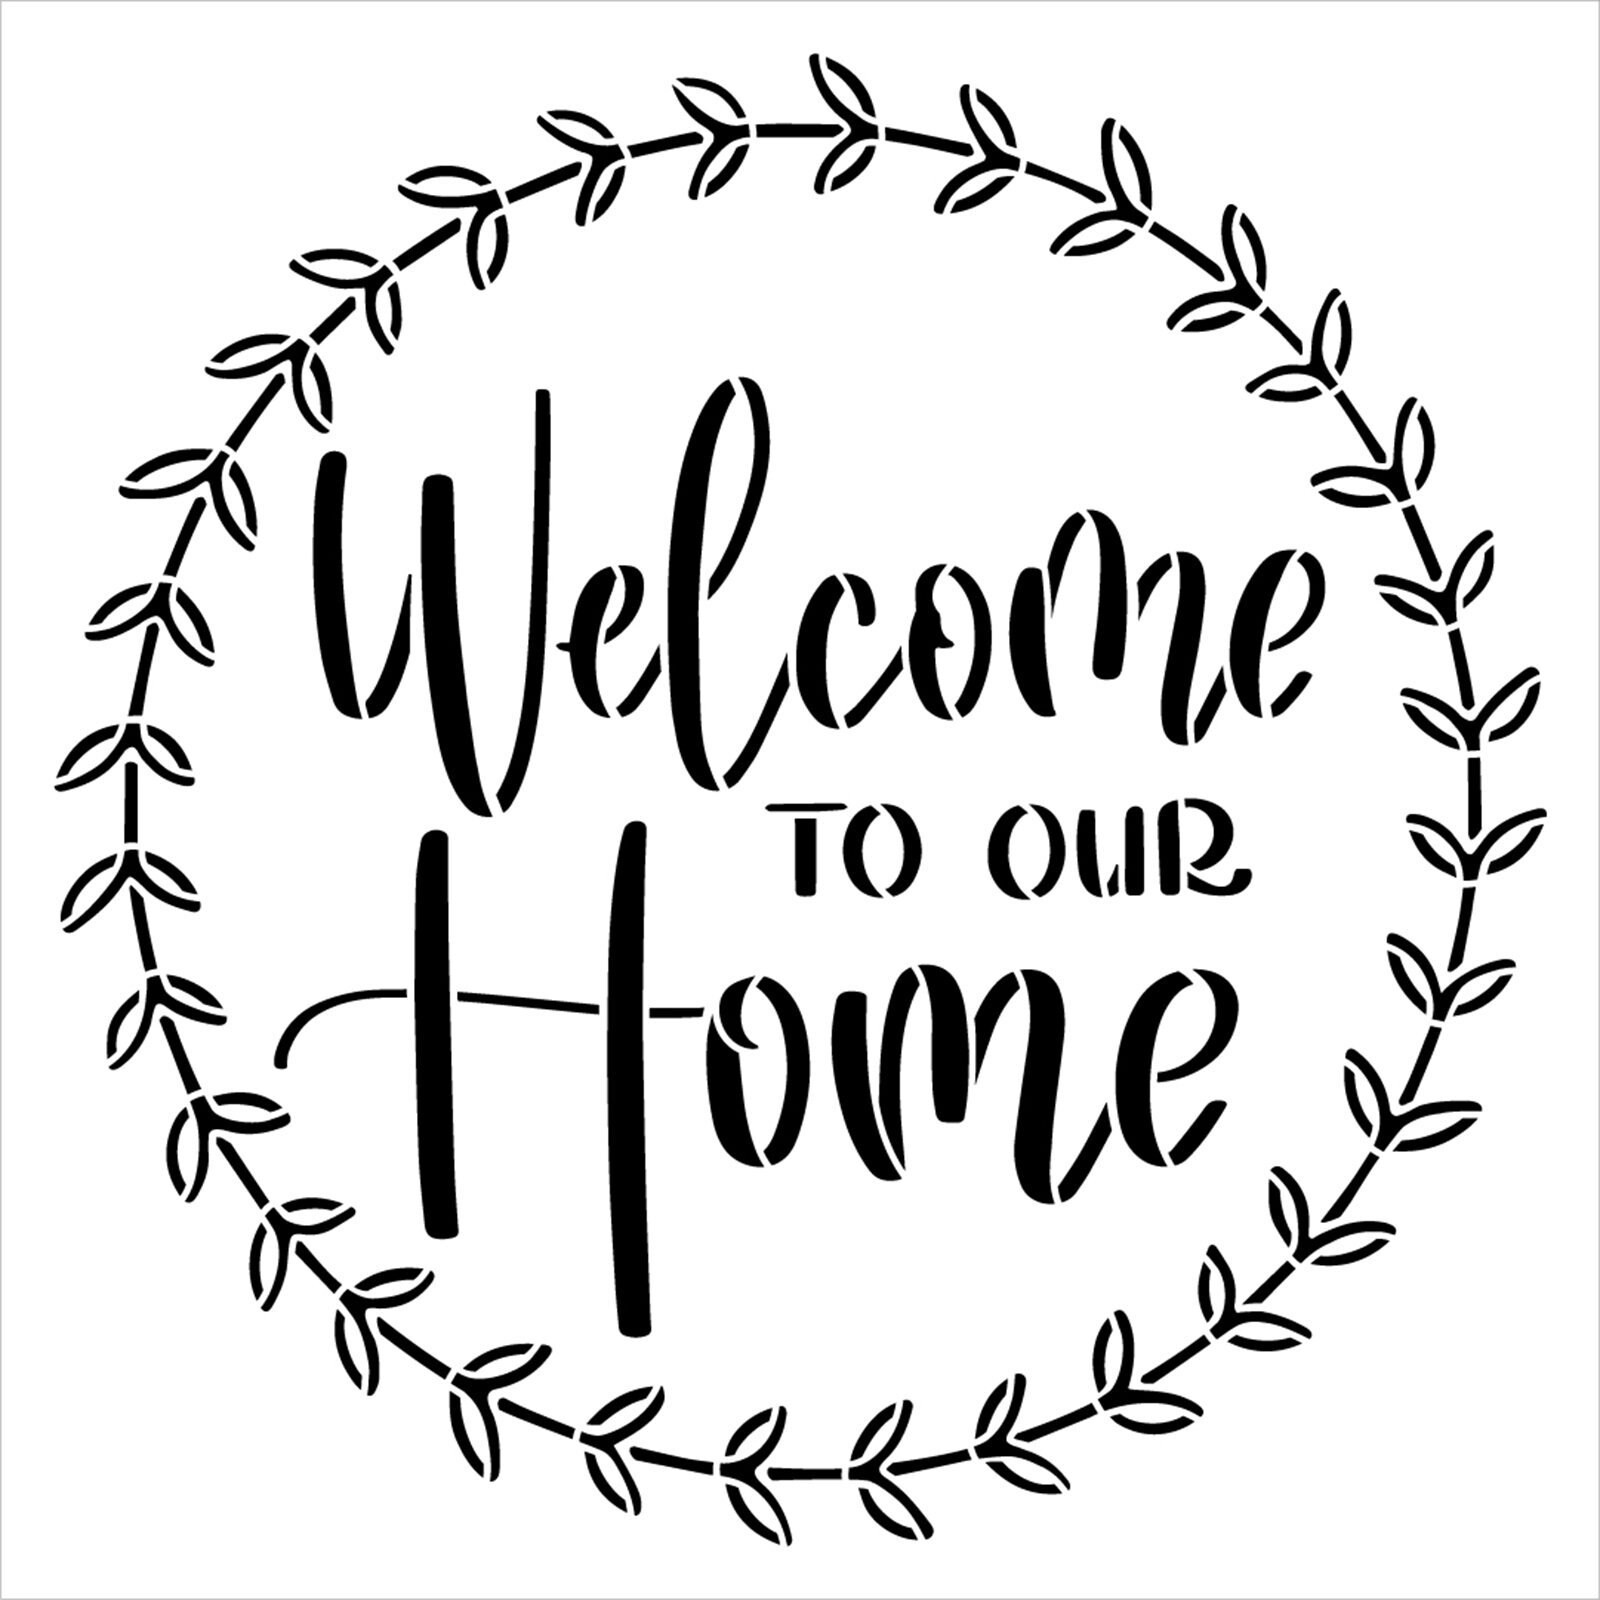 Welcome to Our Home With Wreath Stencil by Studior12 Craft - Etsy